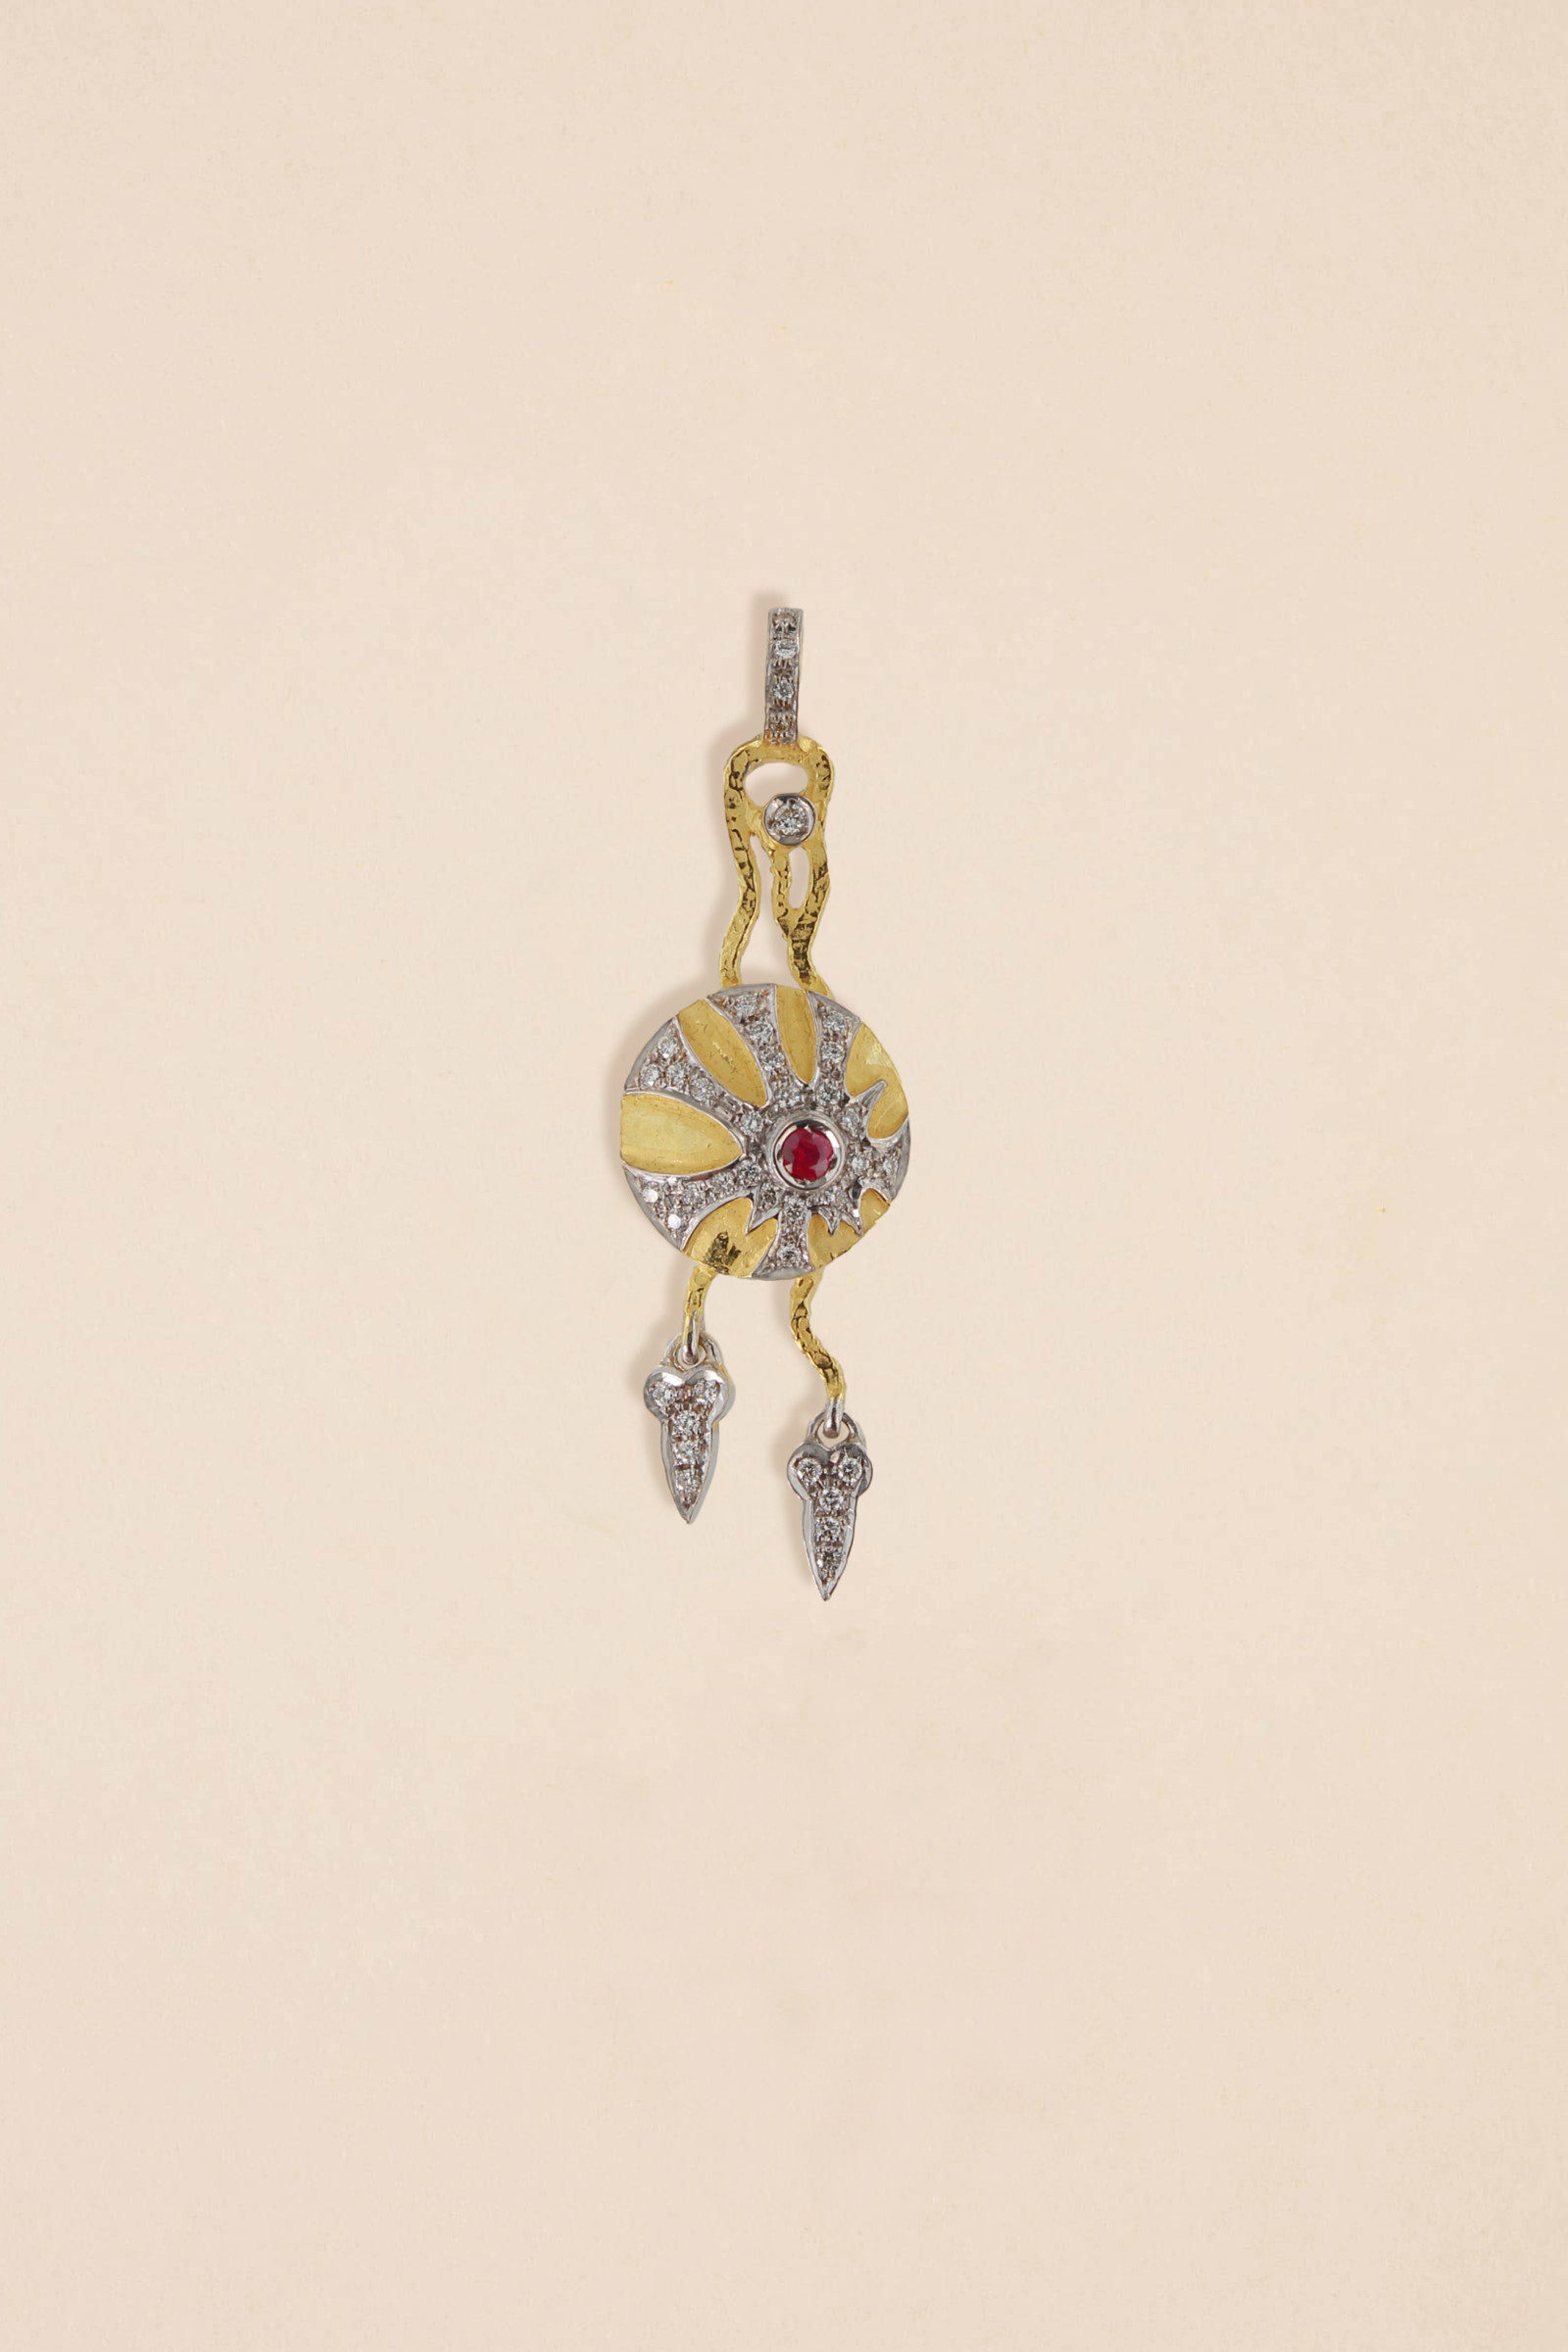 SH778A-18-Kt-Yellow-Gold-Pendant-with-Ruby-and-Diamonds-1